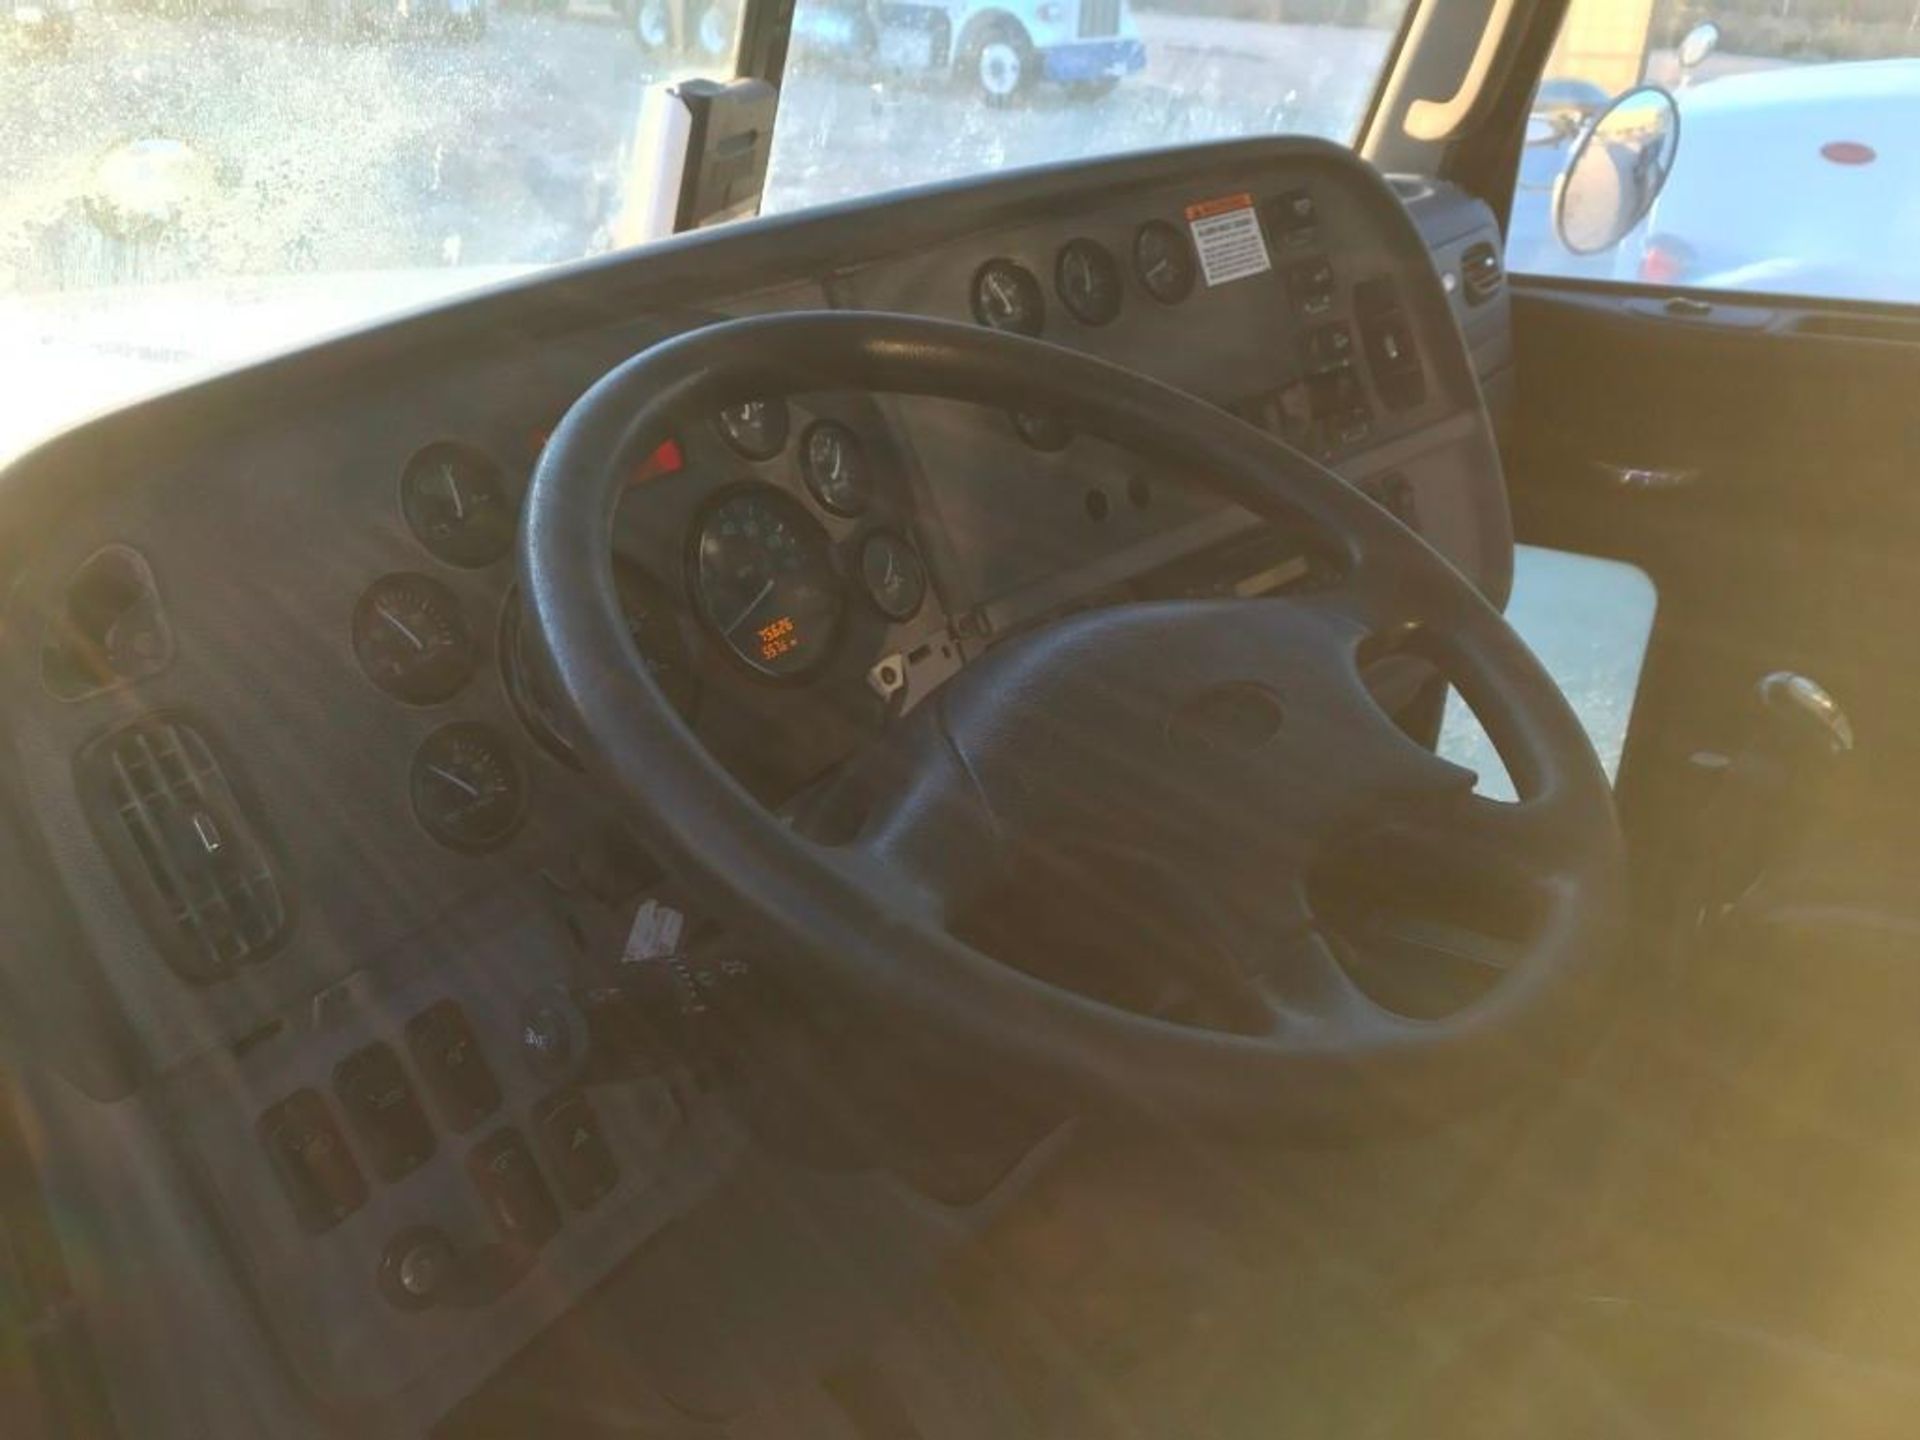 2012 Peterbilt 367 T/A Sleeper Road Tractor (Unit #TRS-164) - Image 11 of 28